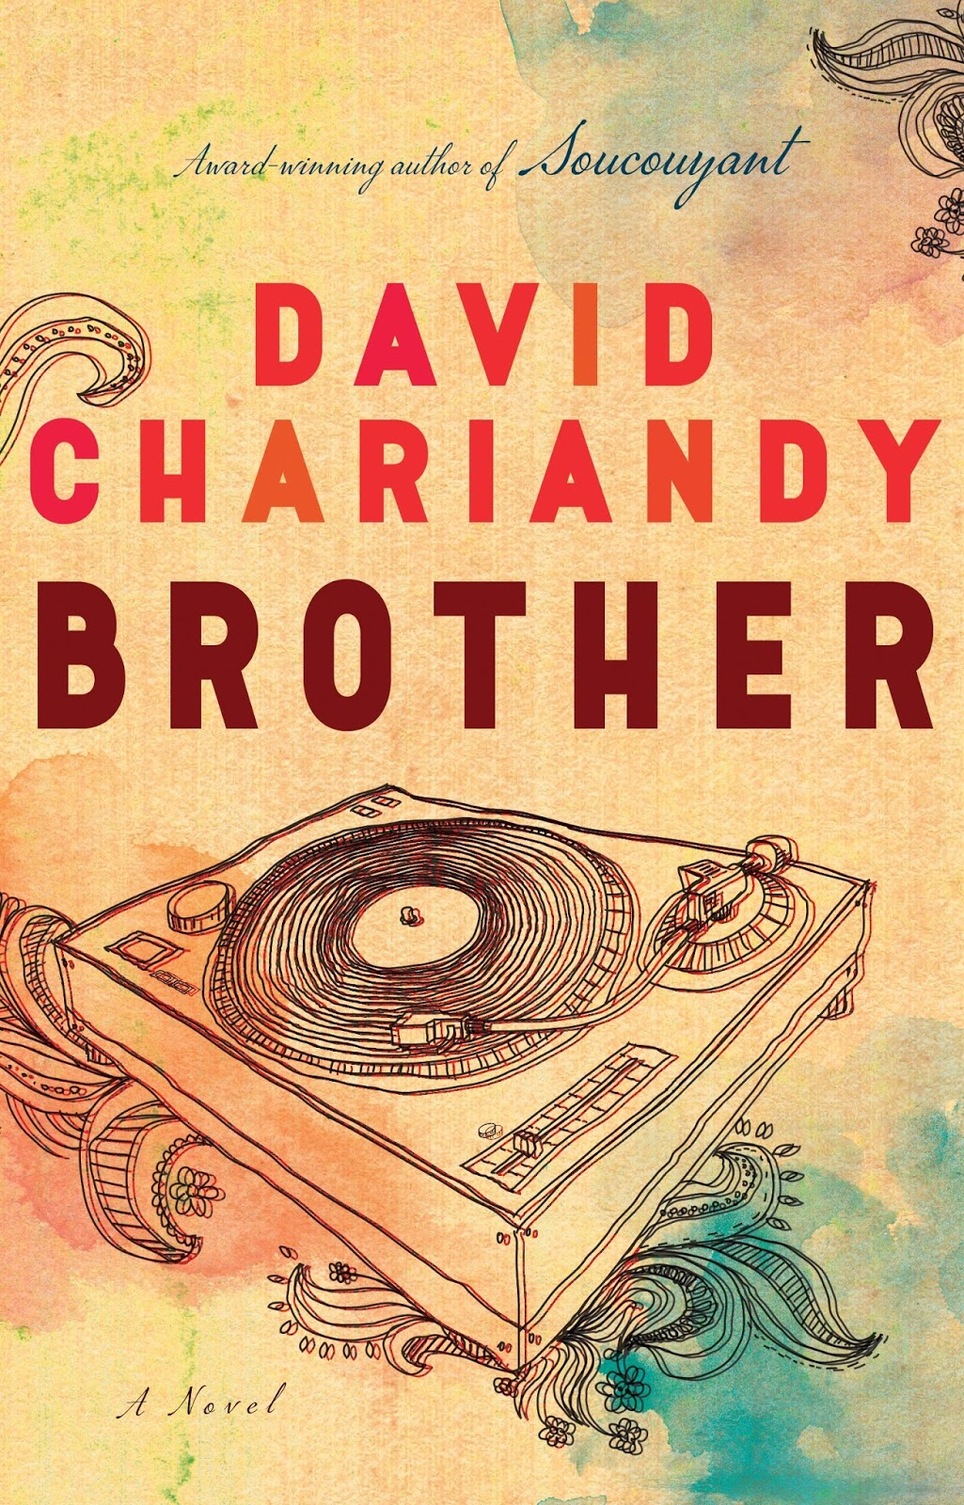 Thurs September 28th: David Chariandy launches BROTHER with Rawi Hage